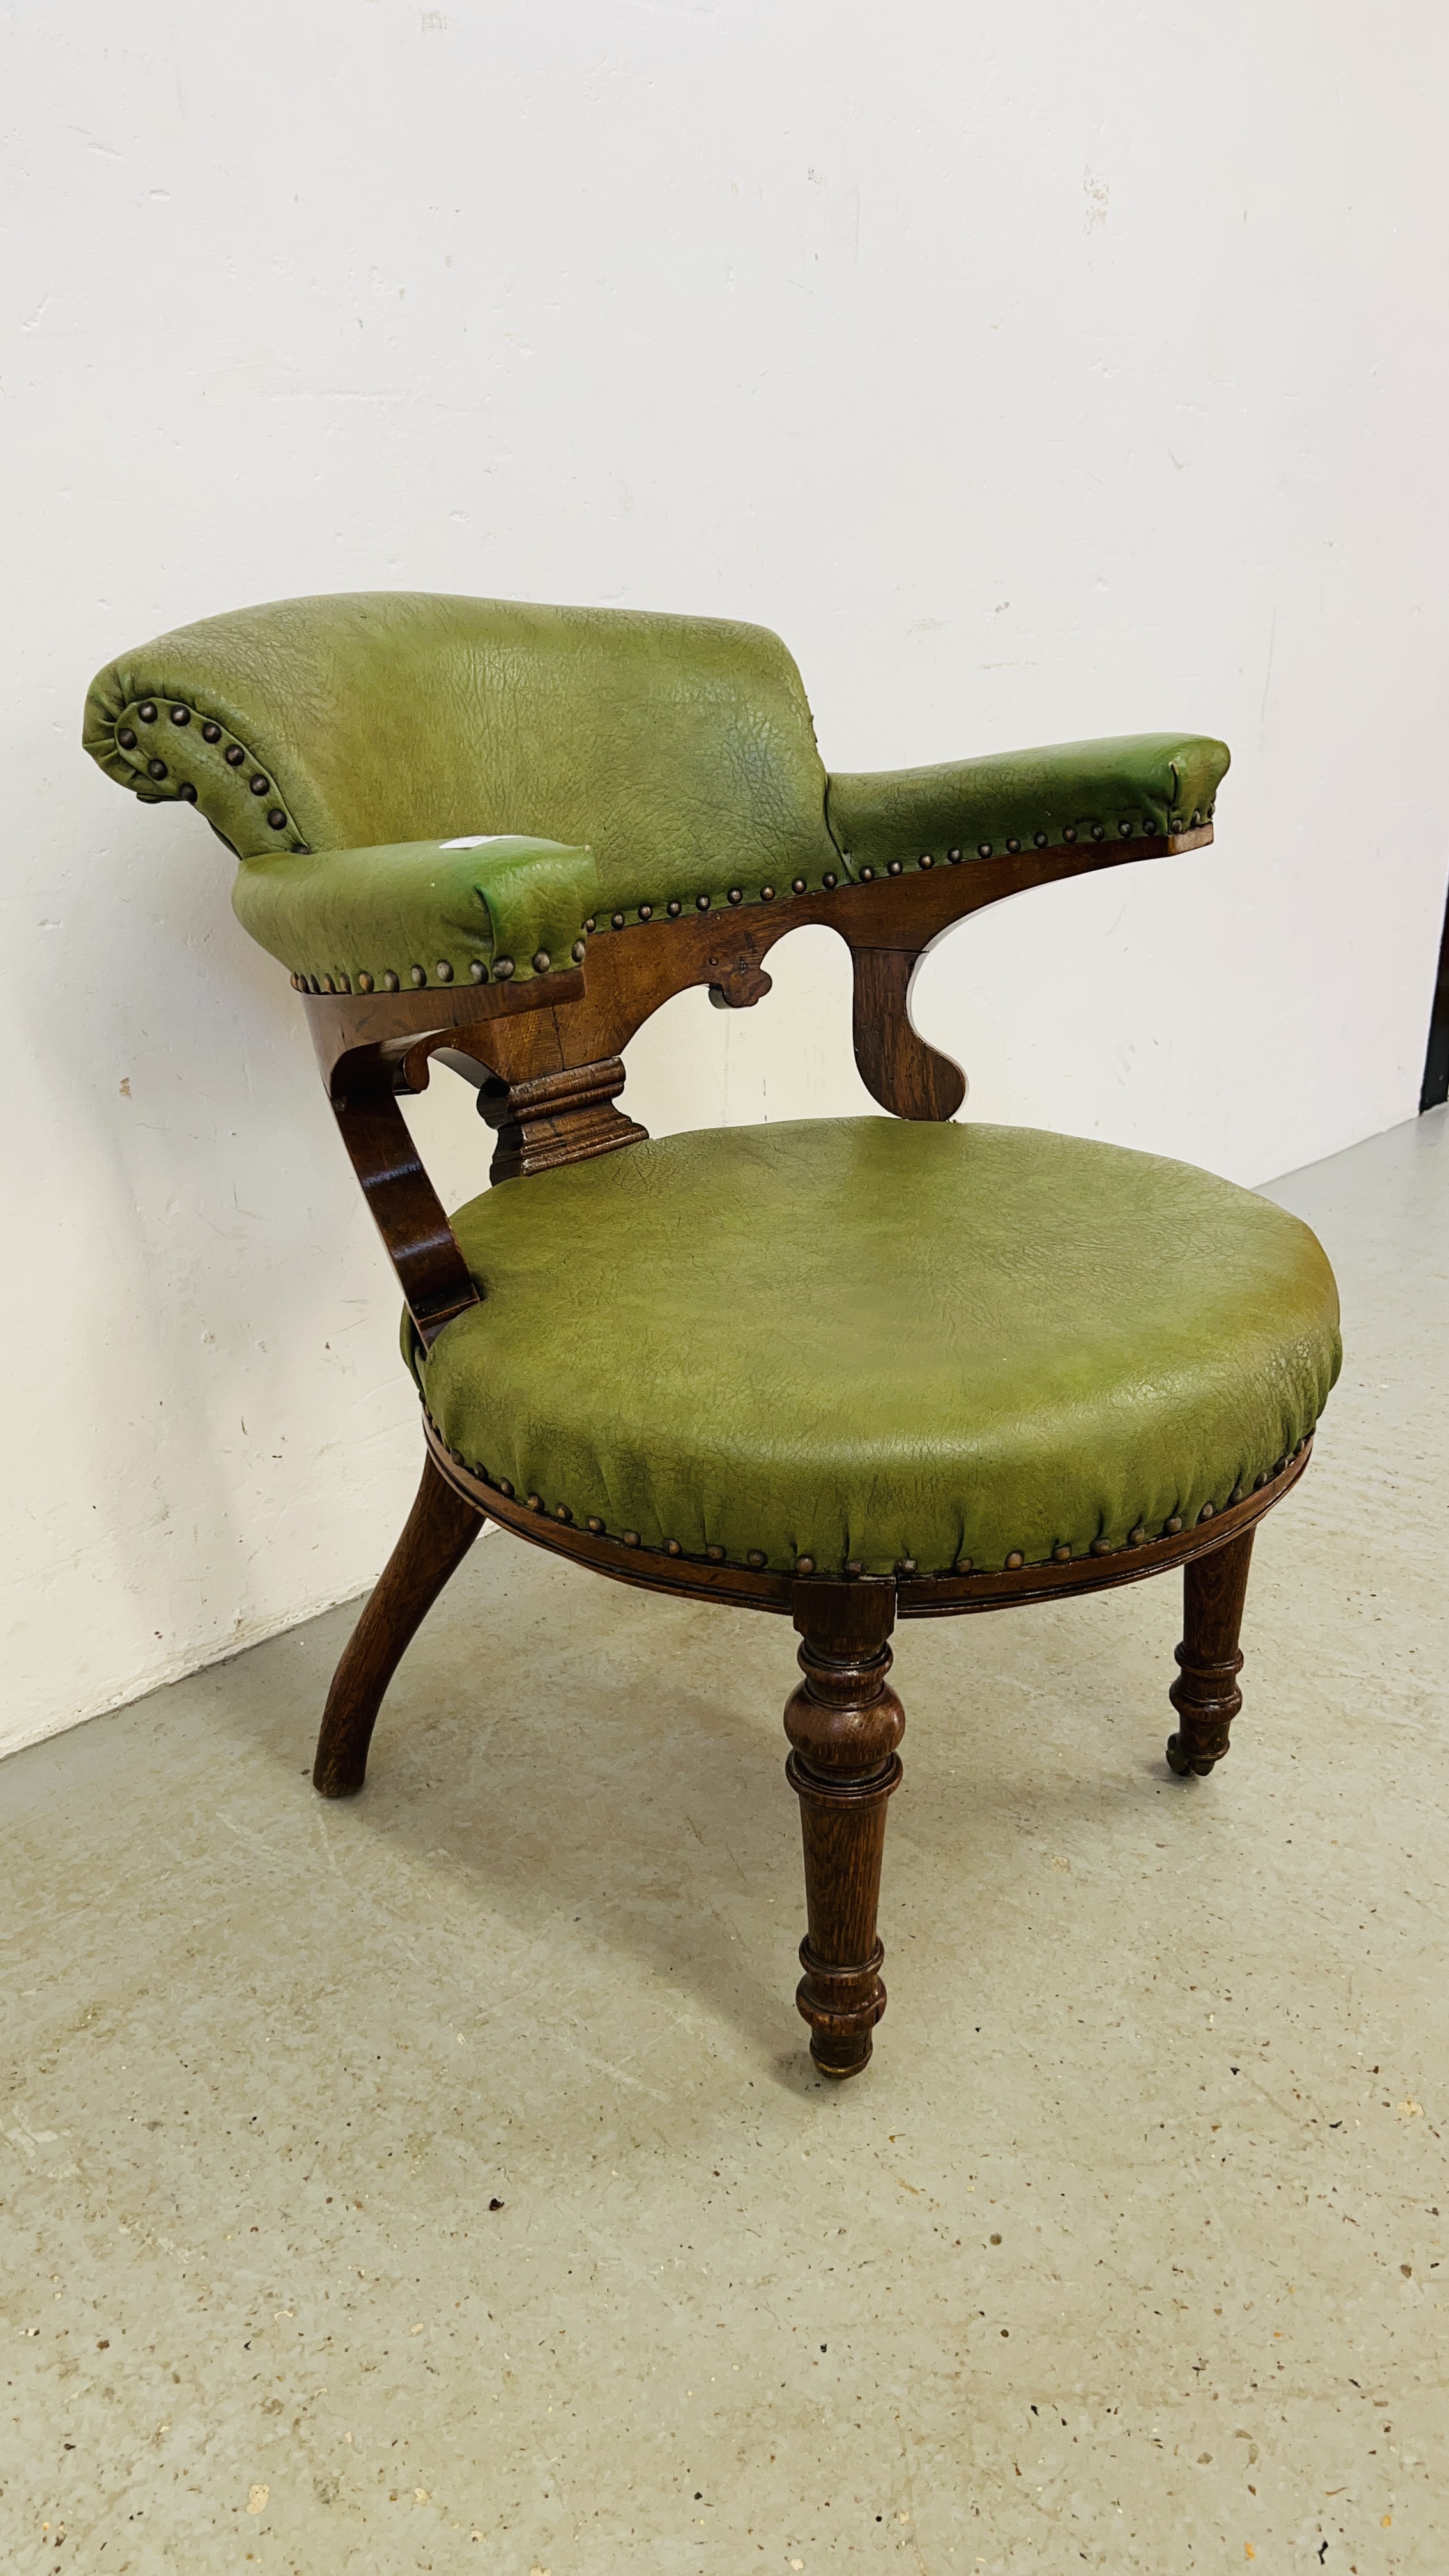 AN ANTIQUE OAK FRAMED TUB CHAIR WITH BOTTLE GREEN LEATHER UPHOLSTERY AND STUD DETAILING. - Image 7 of 7